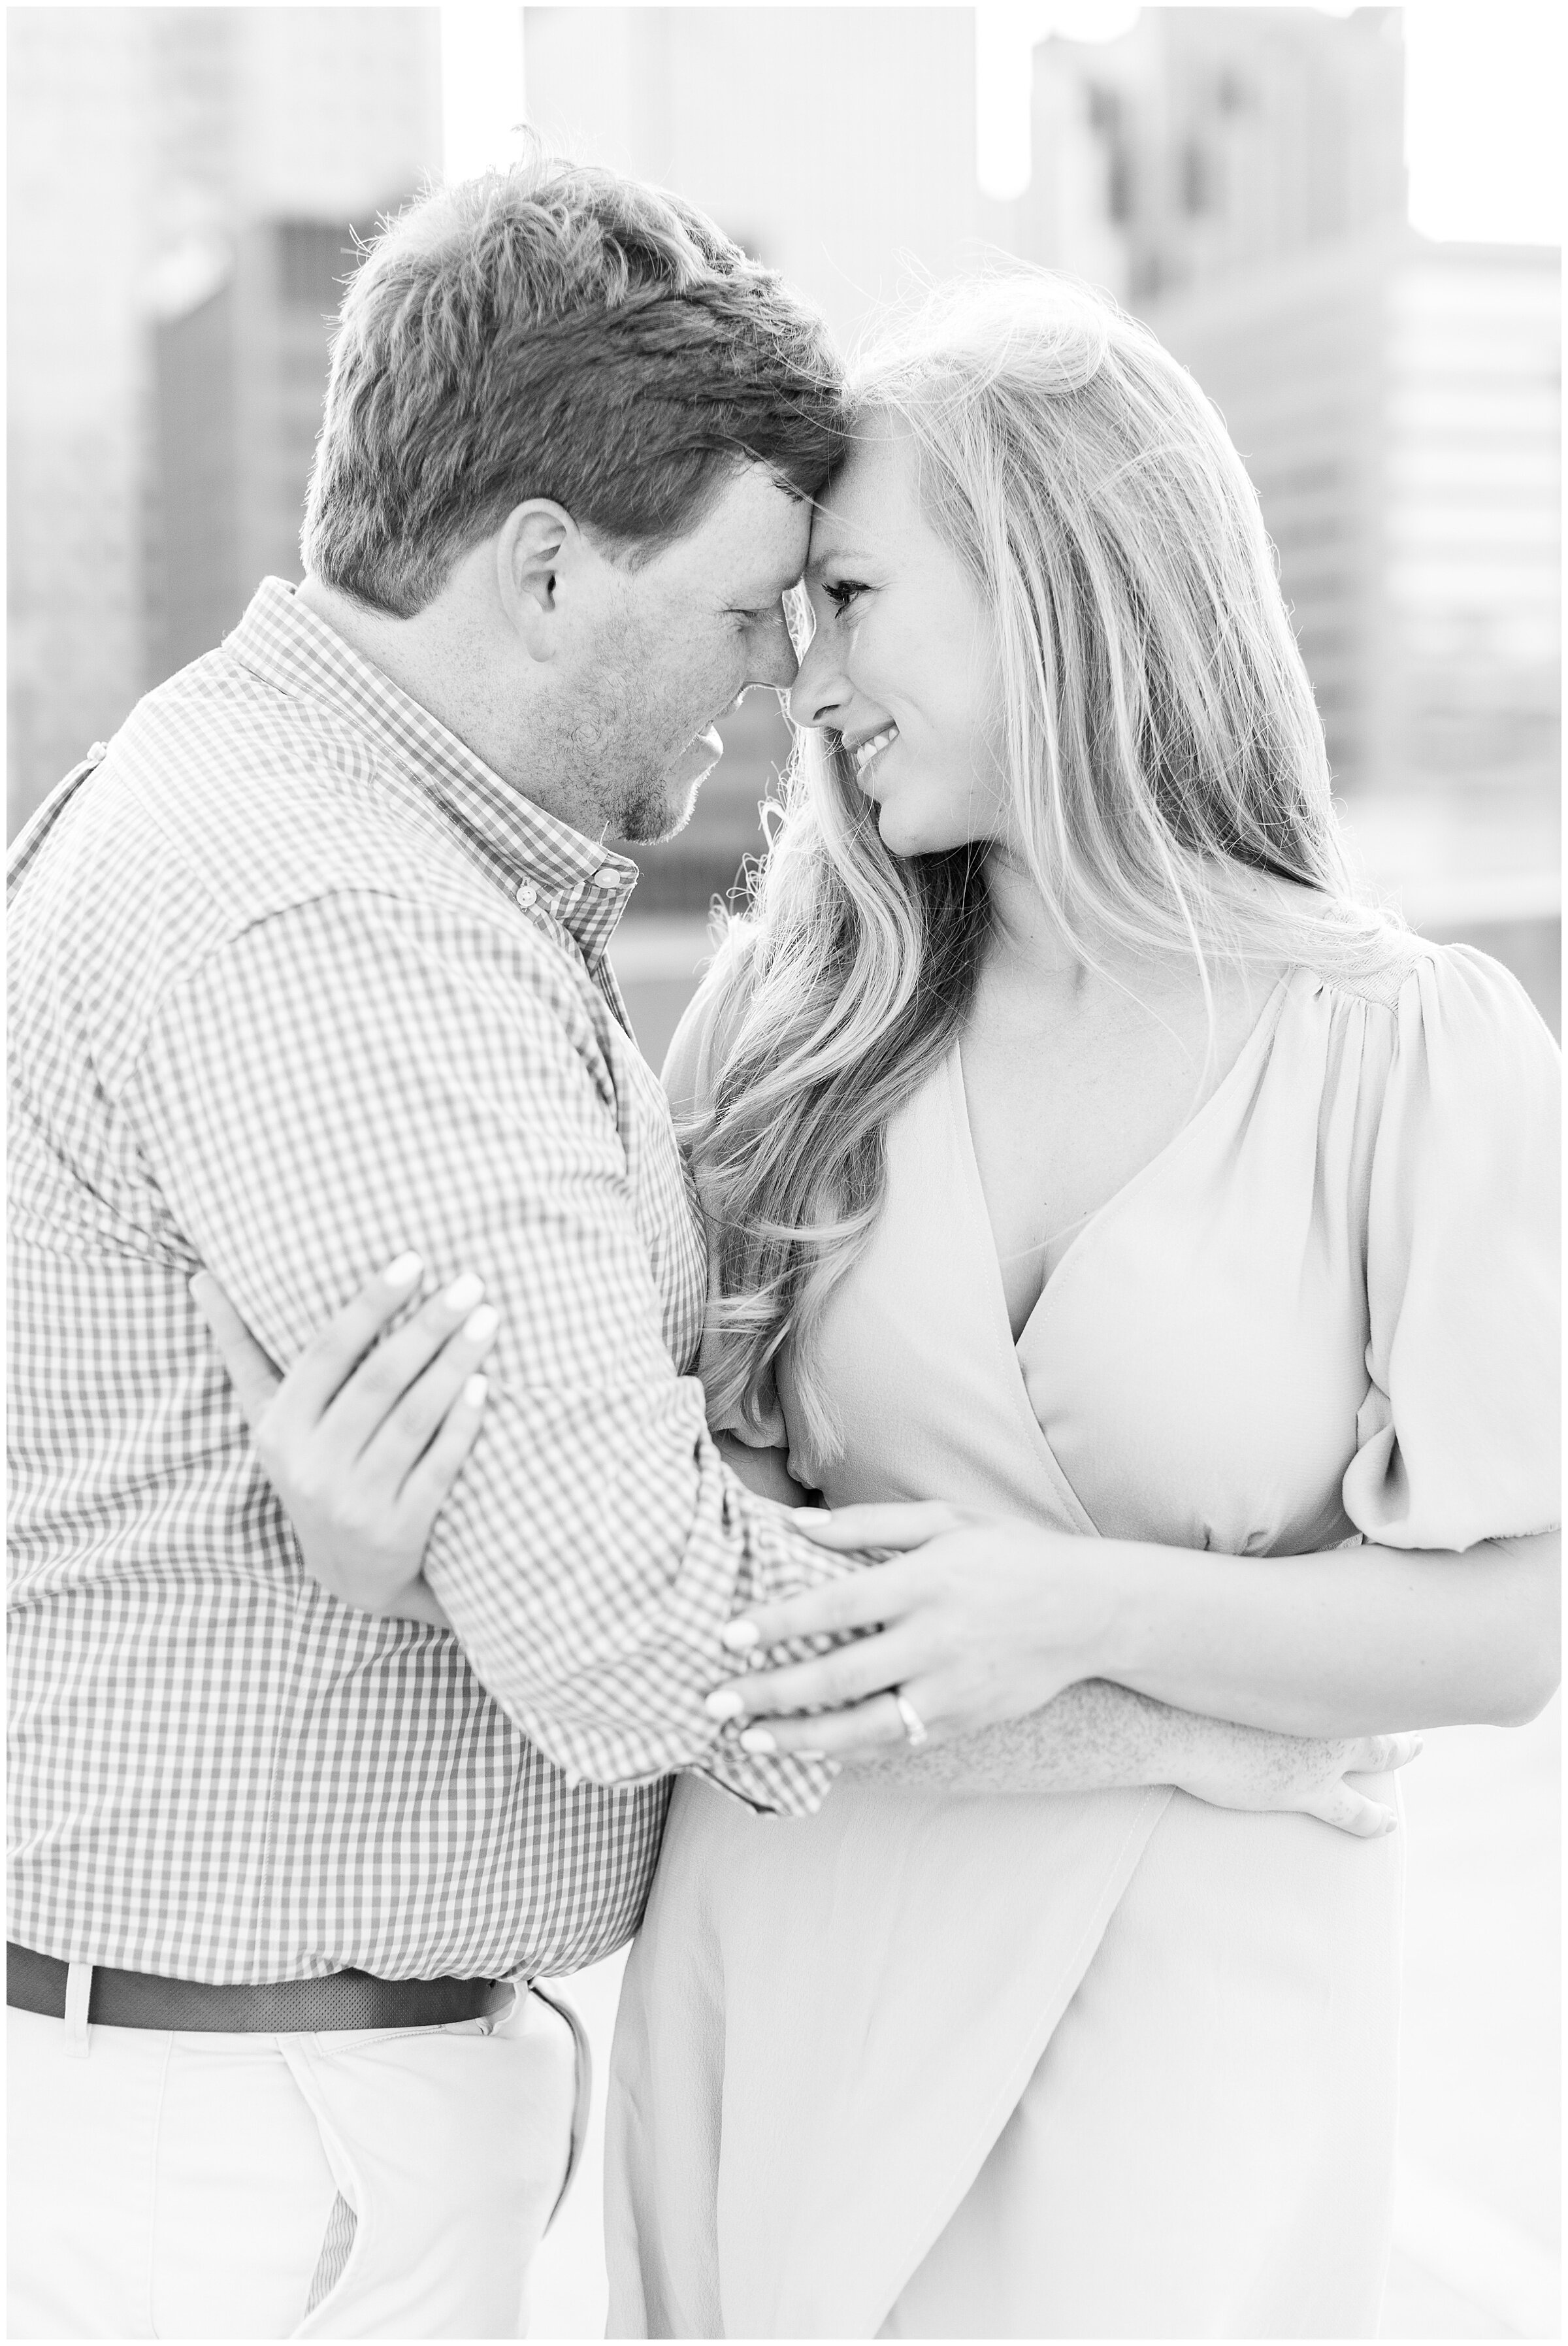  railroad park engagement session, rooftop engagement pictures, lindsey ann photography, downtown Birmingham engagement pictures, Birmingham al wedding photographer 